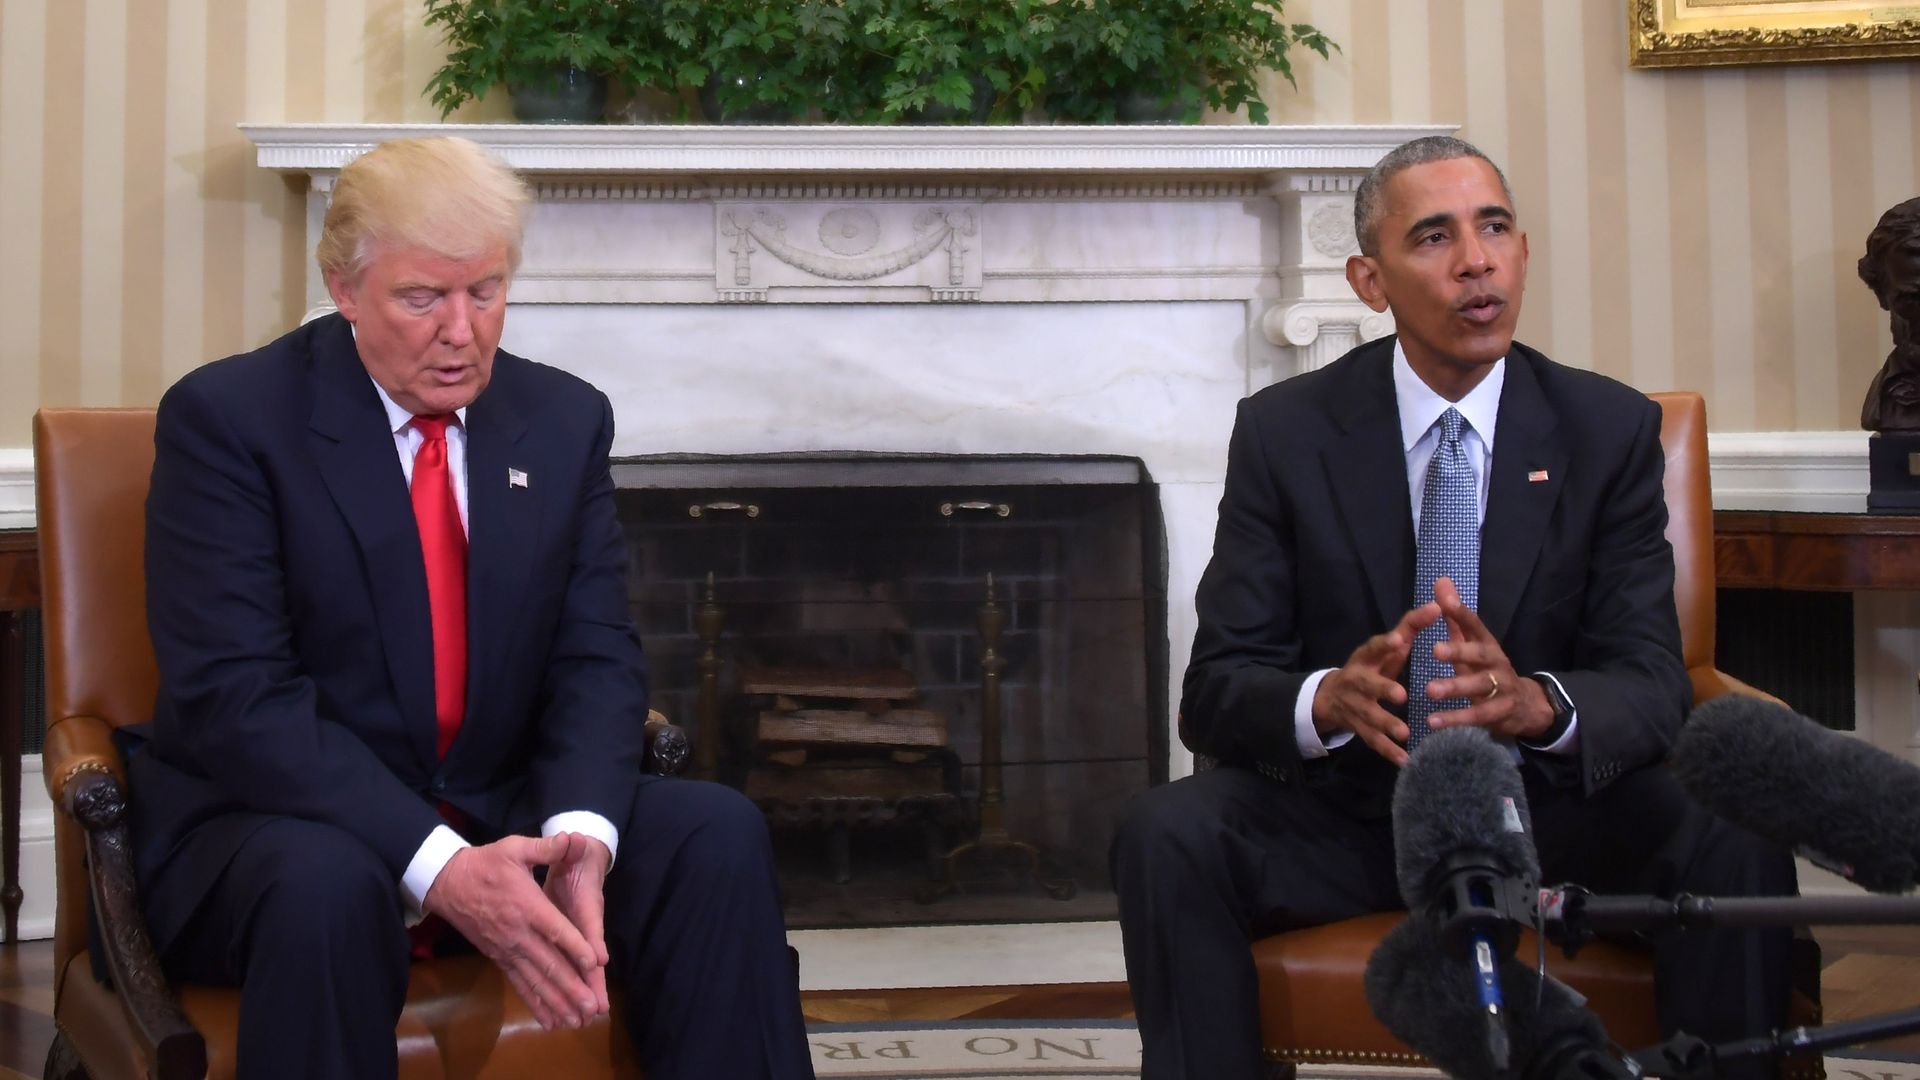 Trump and Obama meet in the Oval Office.